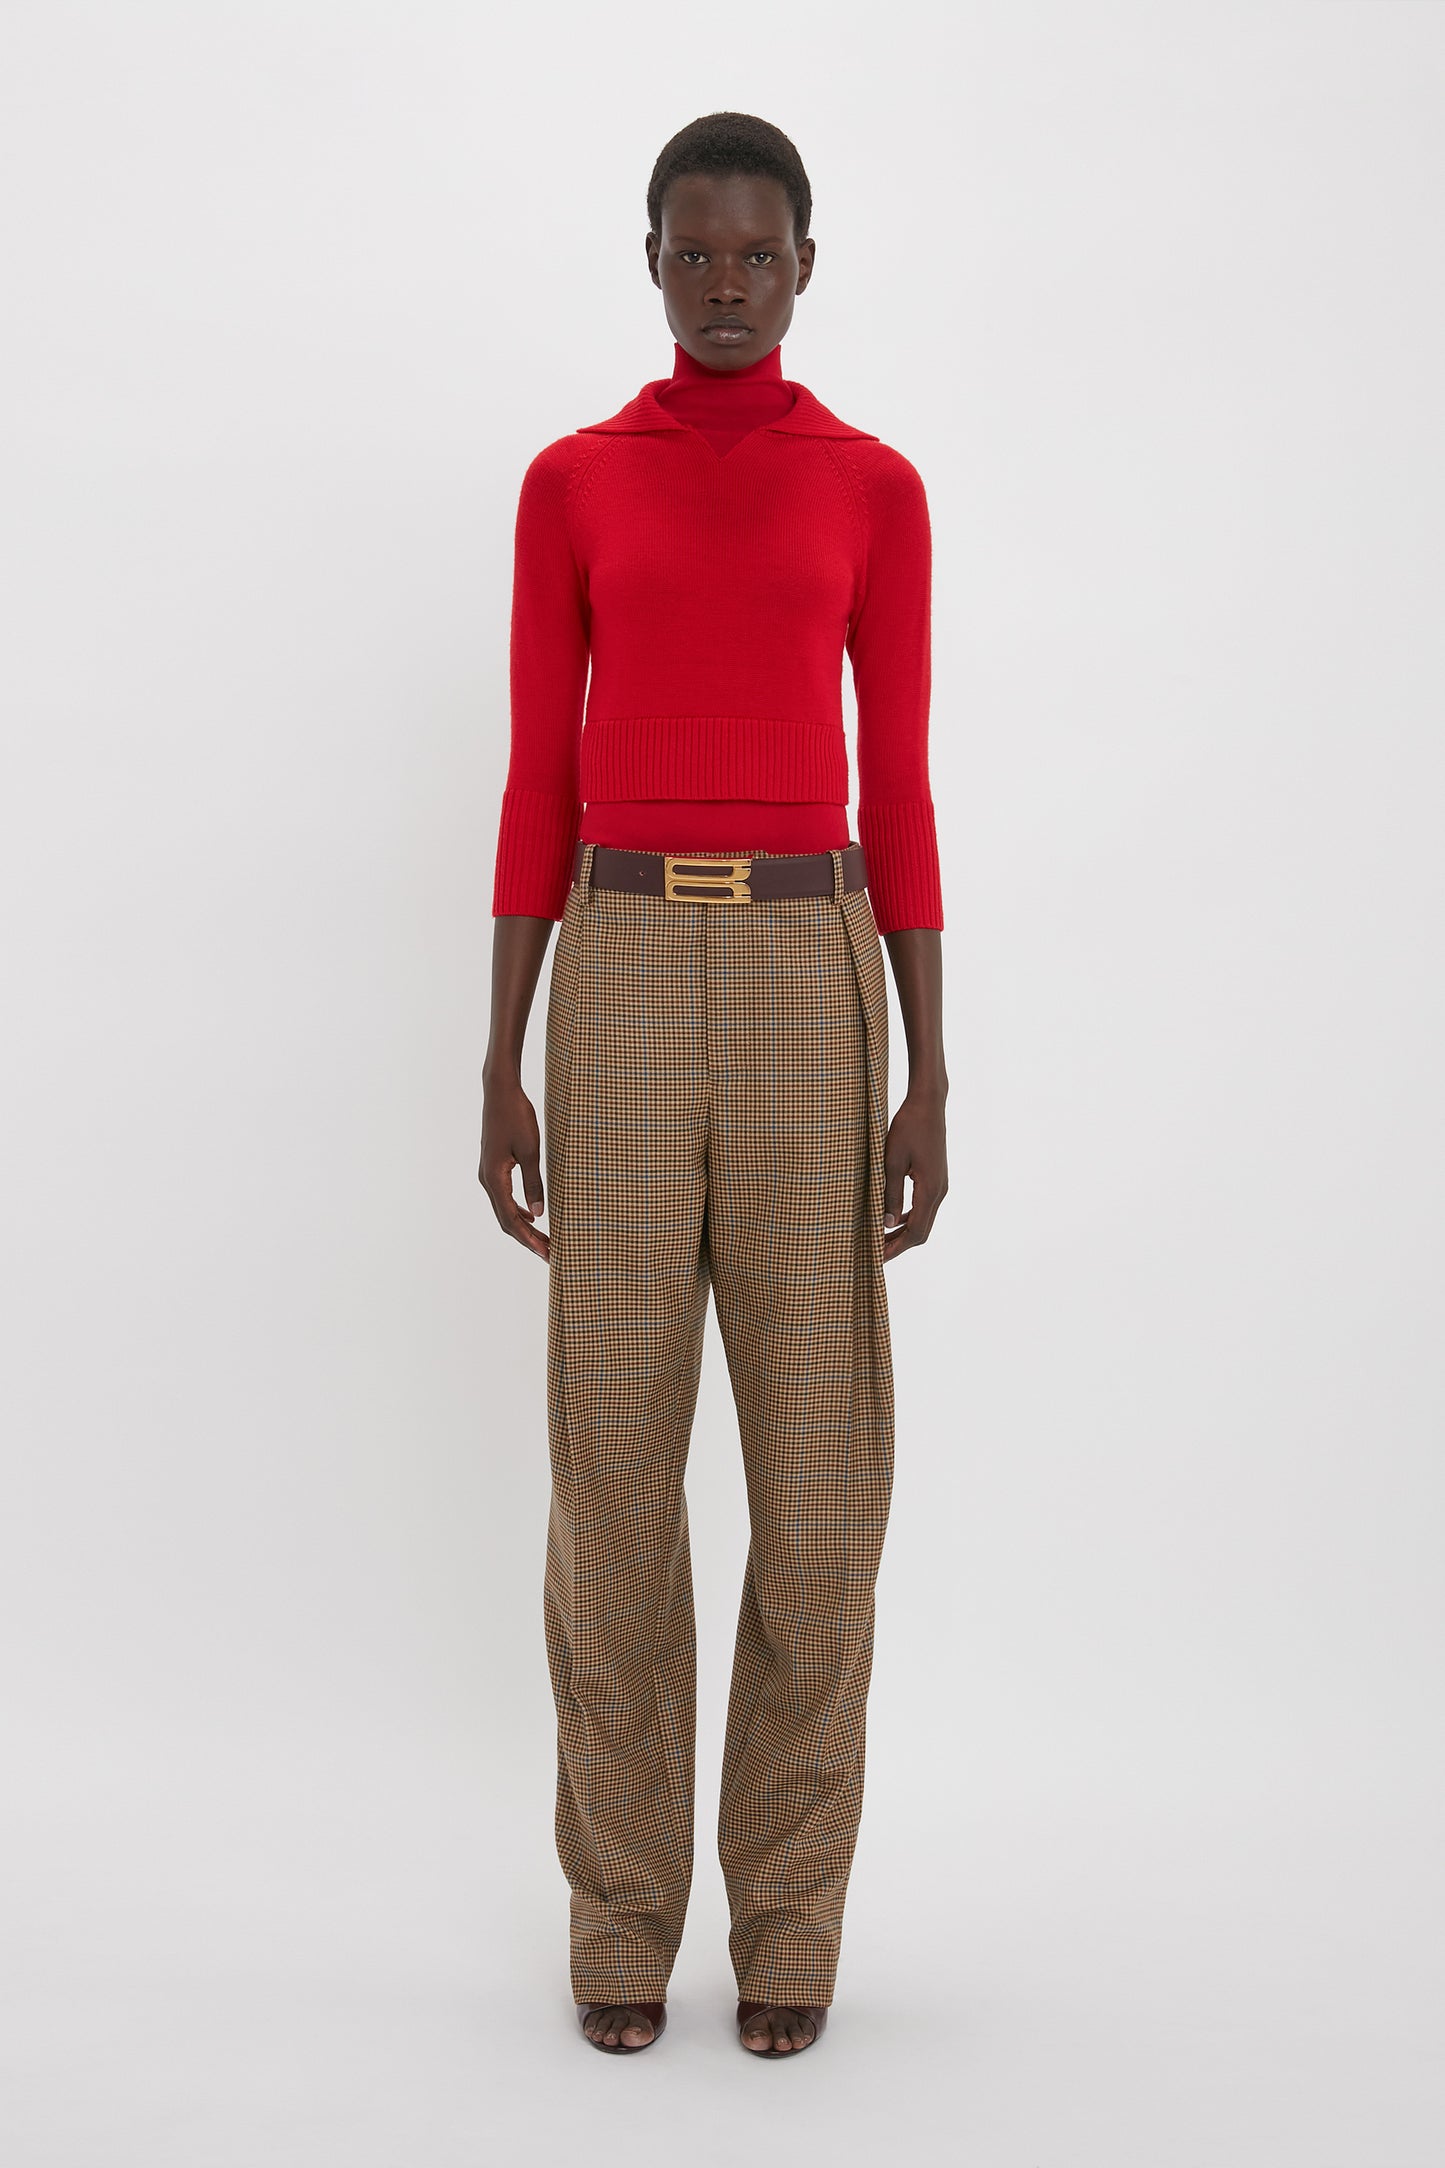 A person stands against a plain background, wearing a Double Layer Top In Deep Red by Victoria Beckham and high-waisted brown plaid trousers with a belt.